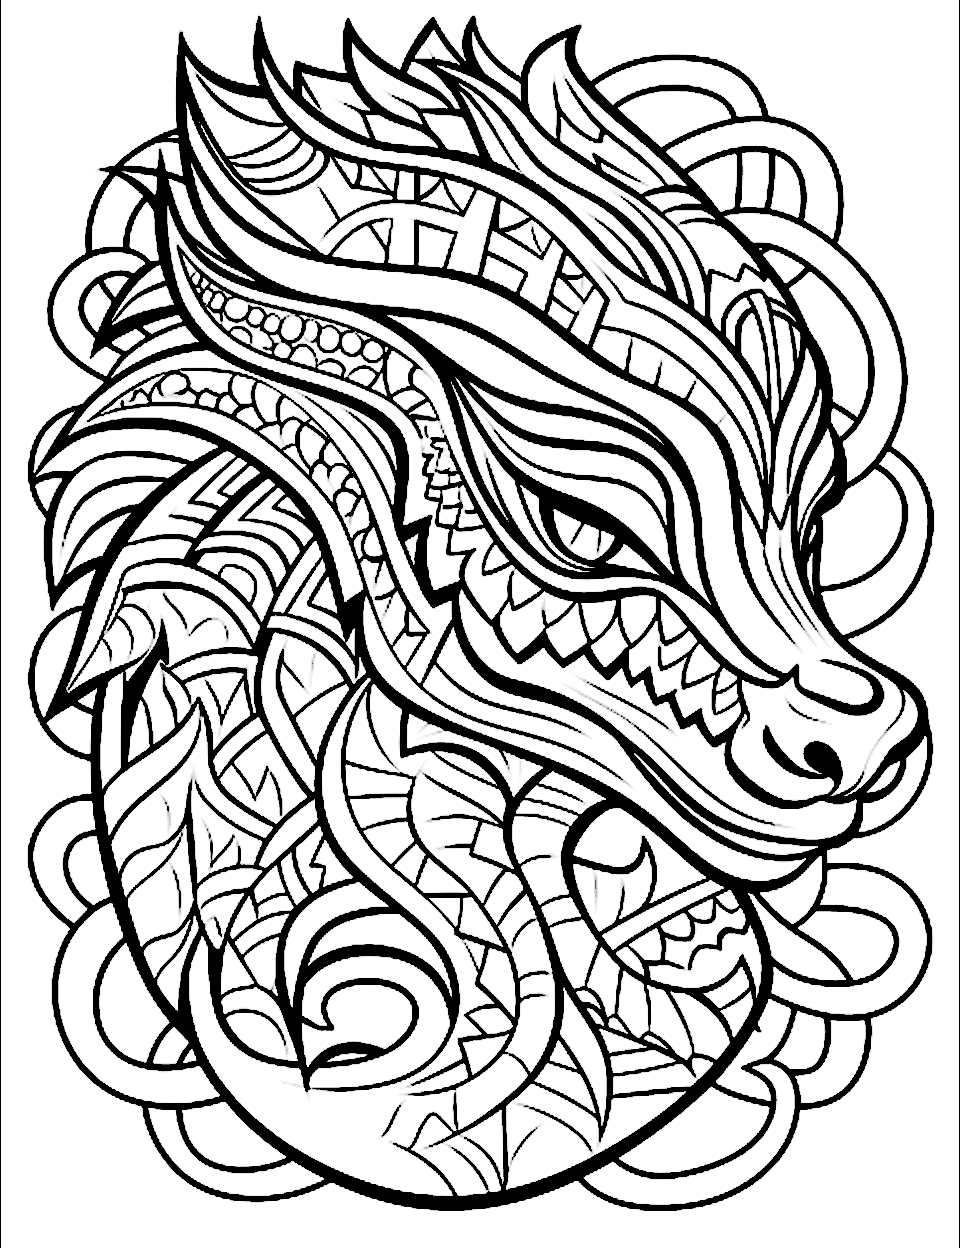 Dragon's Abstract Art Adult Coloring Page - An abstract interpretation of a dragon created with a variety of shapes, lines, and patterns.